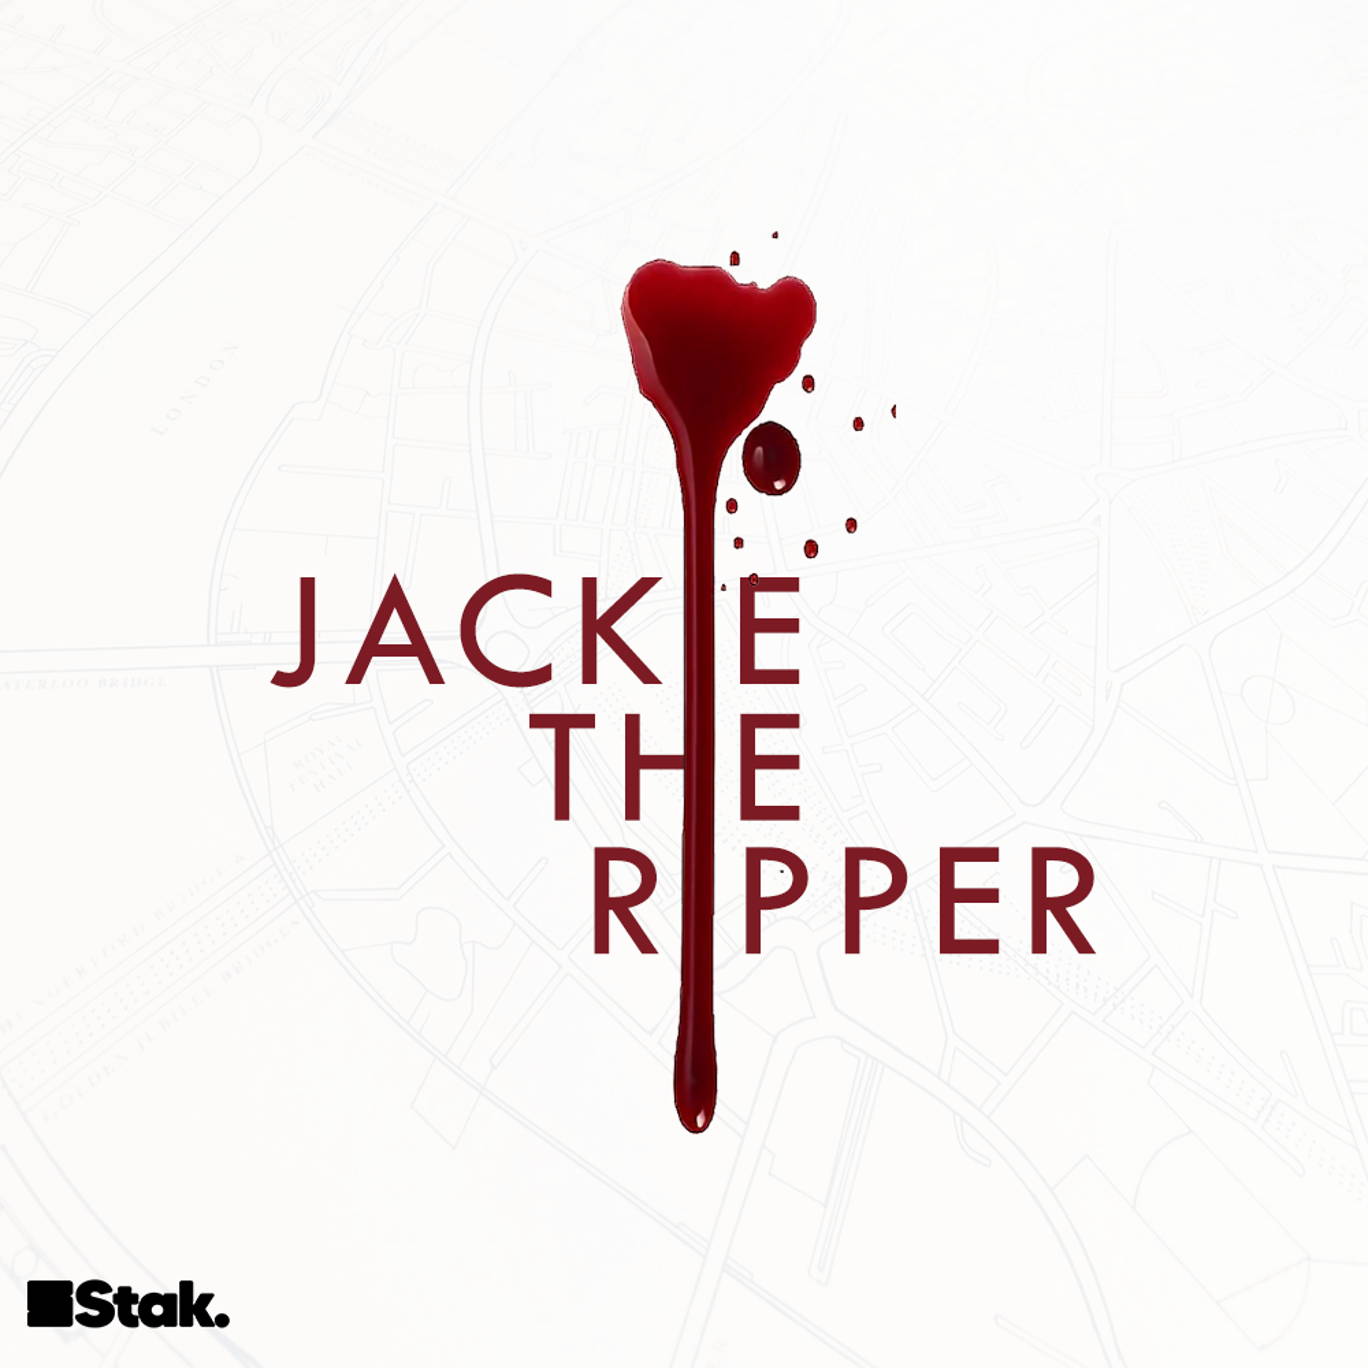 The artwork for the Jackie the Ripper podcast.